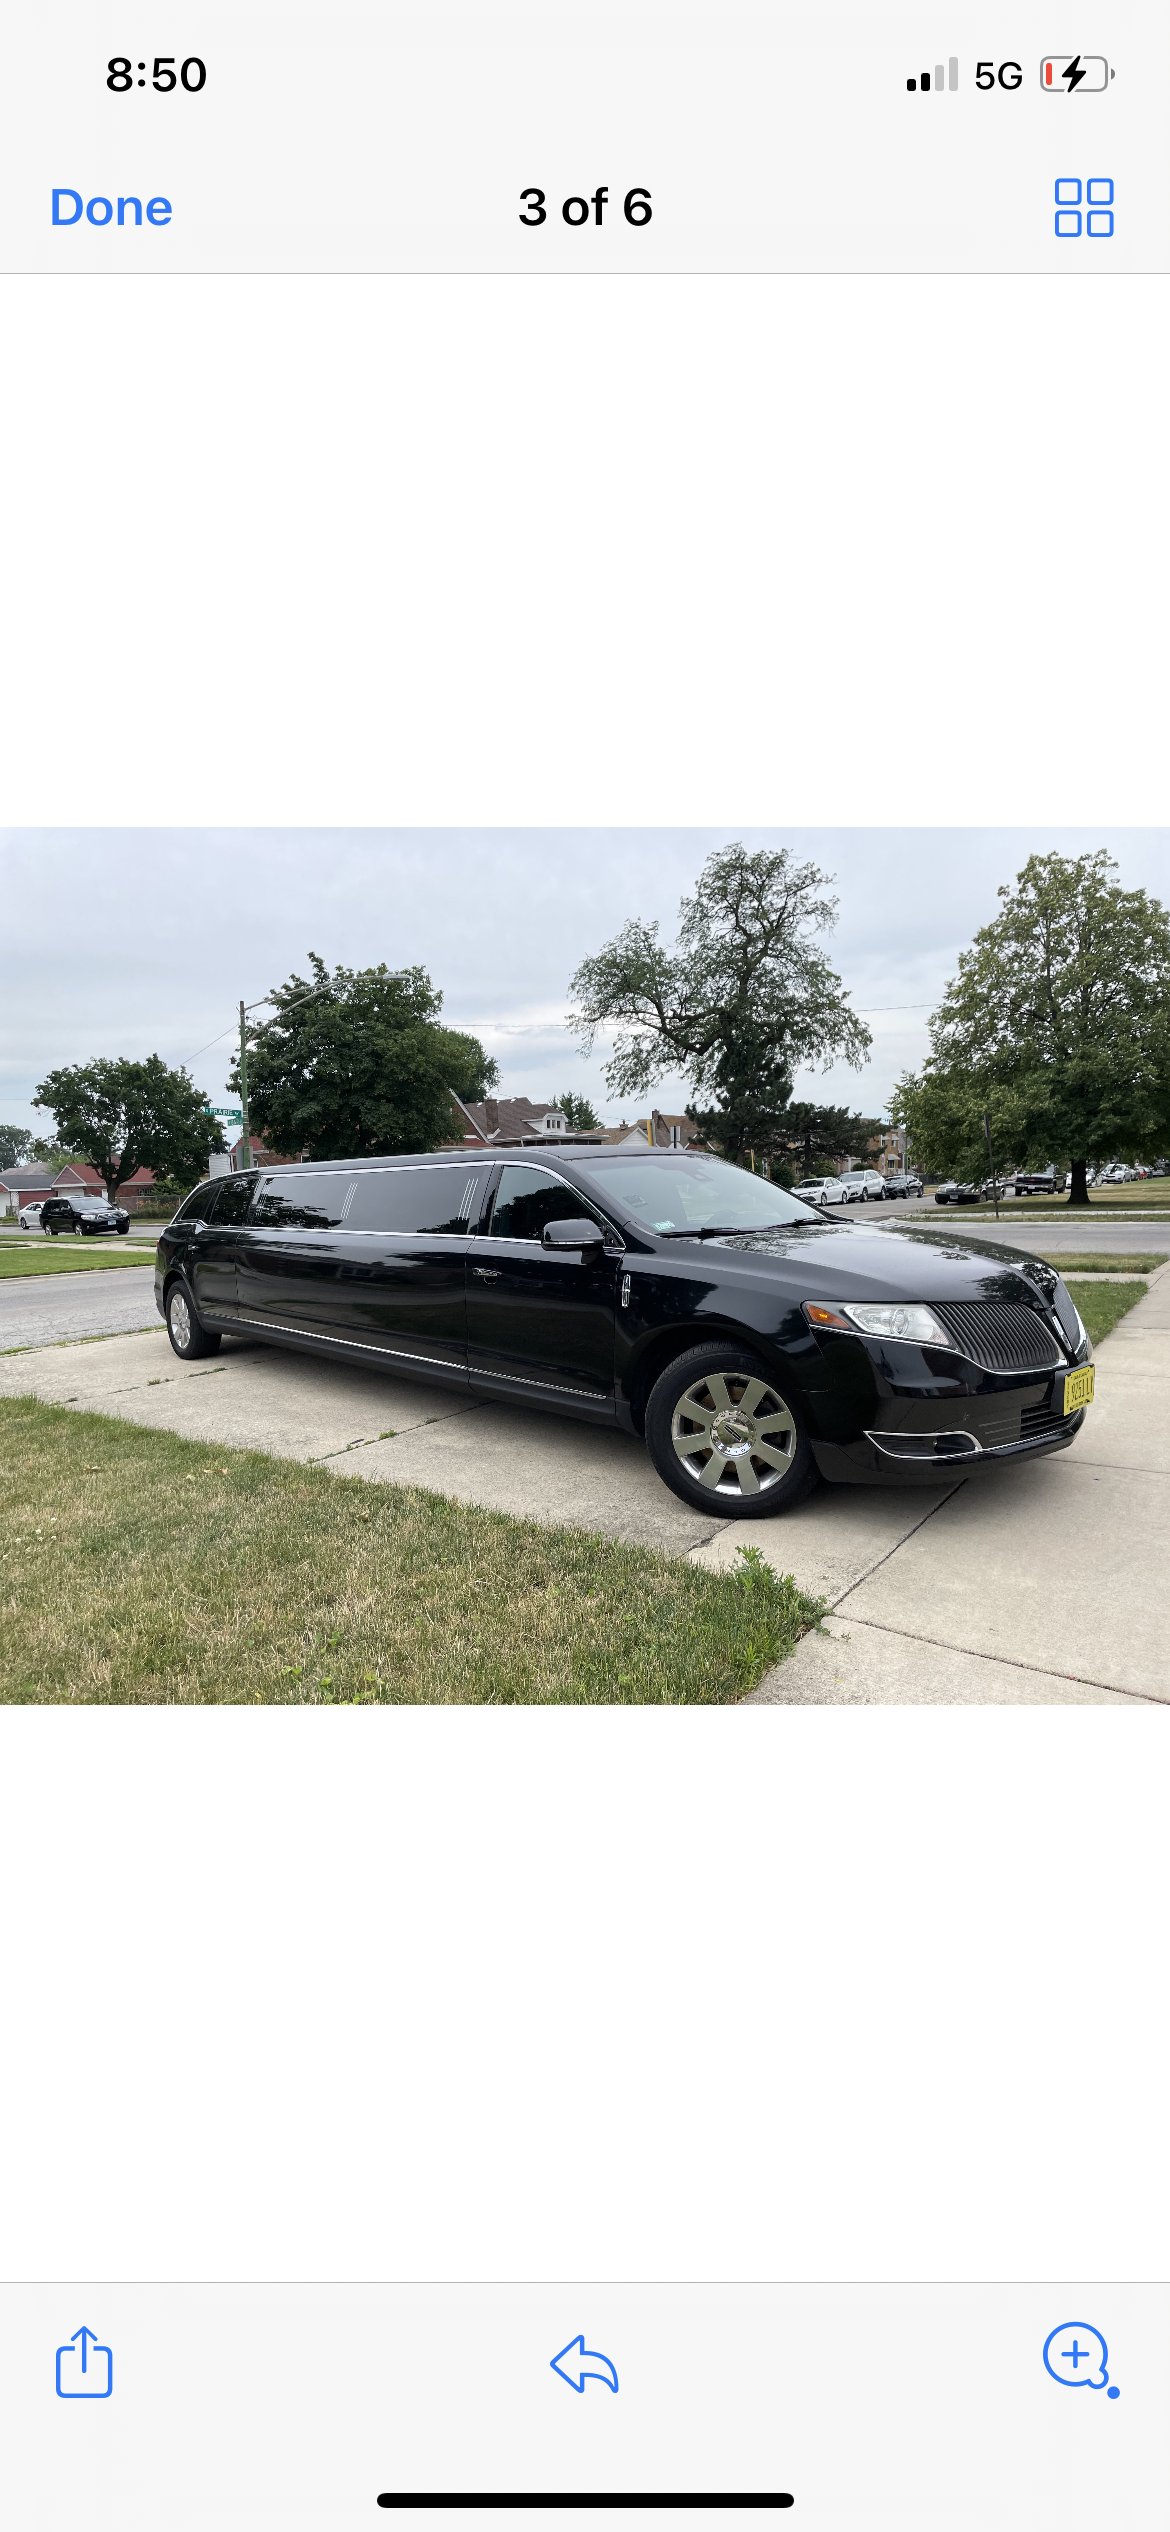 Limousine for sale: 2014 Lincoln mkt 120&quot; by executive